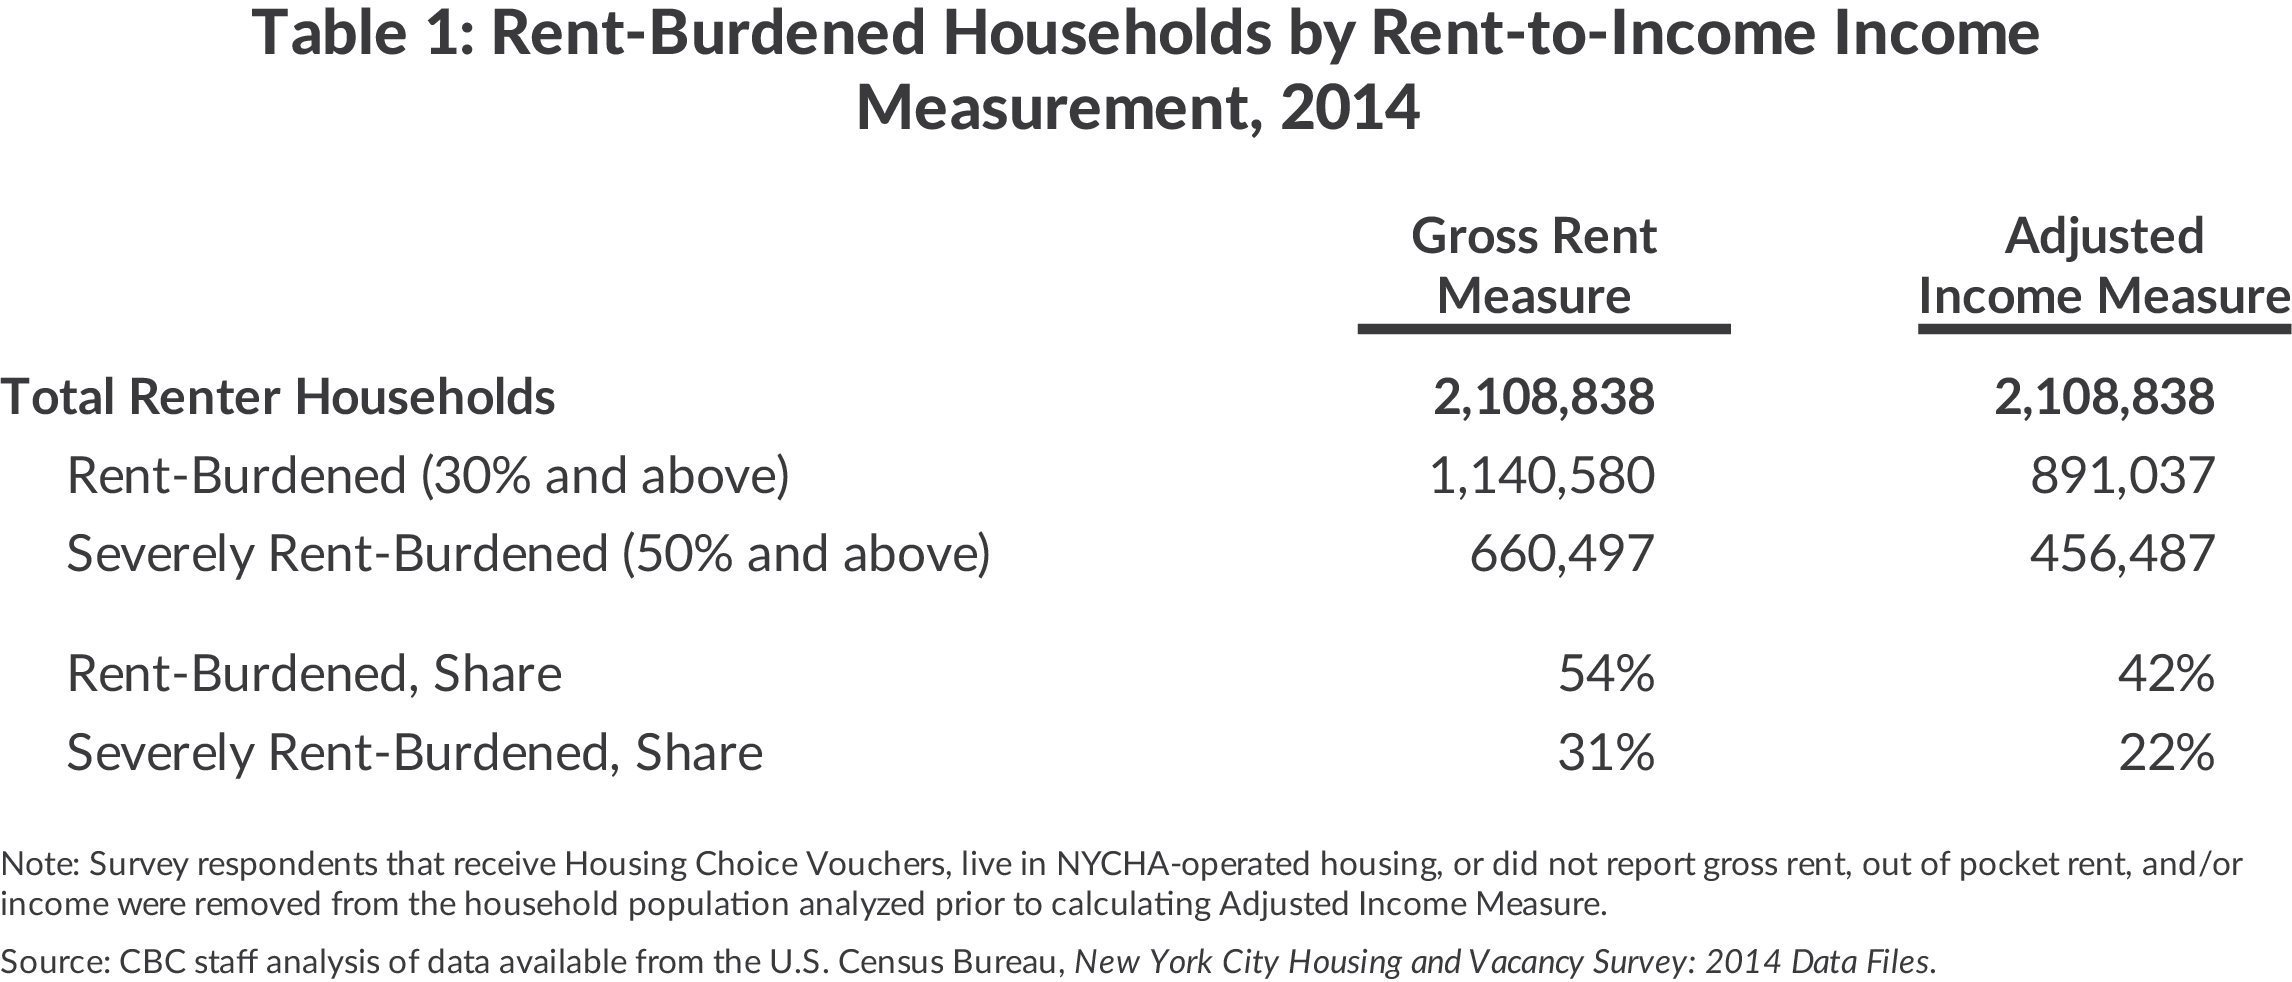 Table 1: Rent-Burdened Households by Rent-to-Income IncomeMeasurement, 2014 